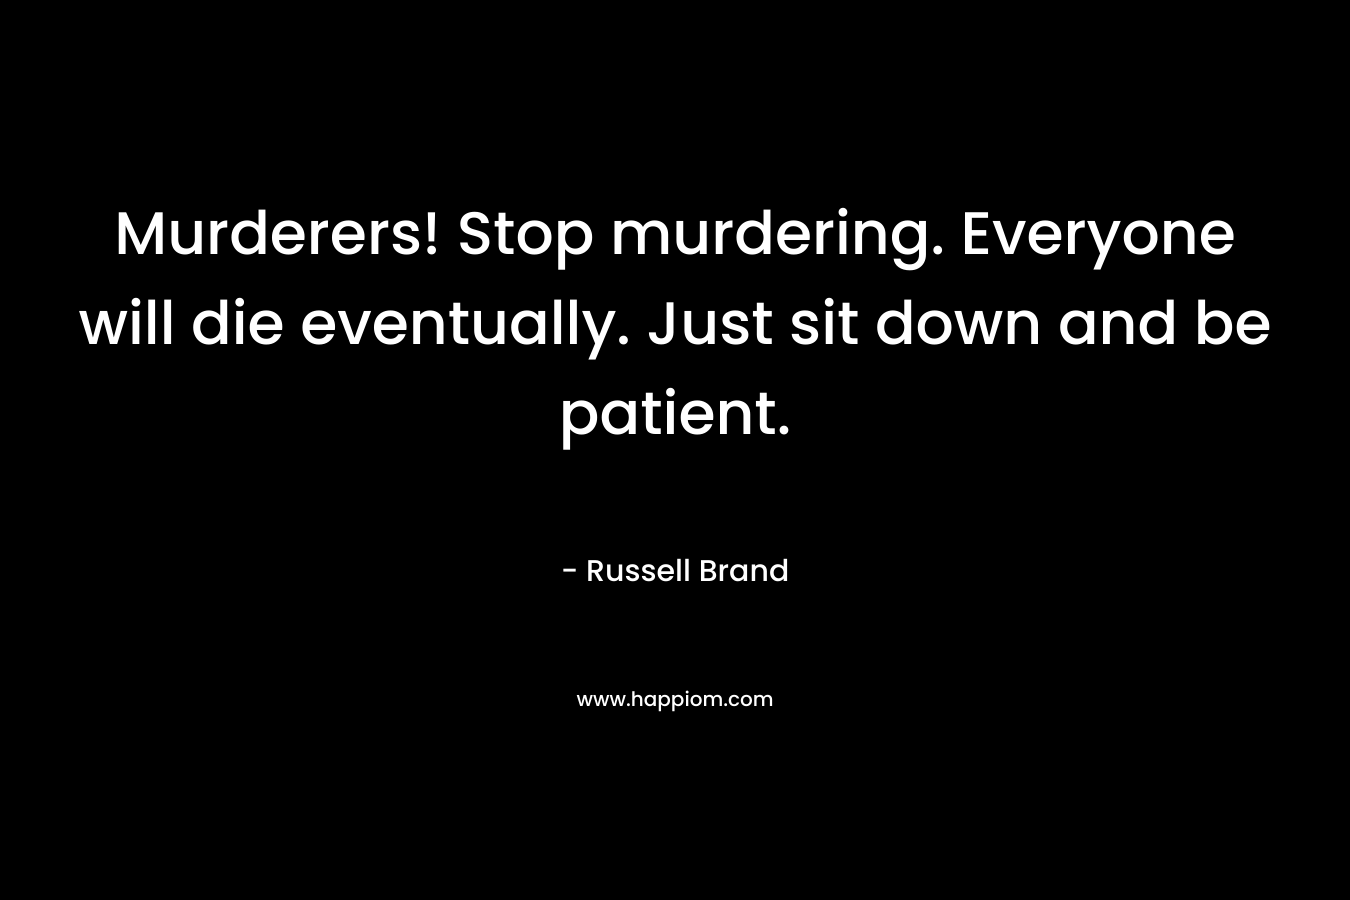 Murderers! Stop murdering. Everyone will die eventually. Just sit down and be patient.